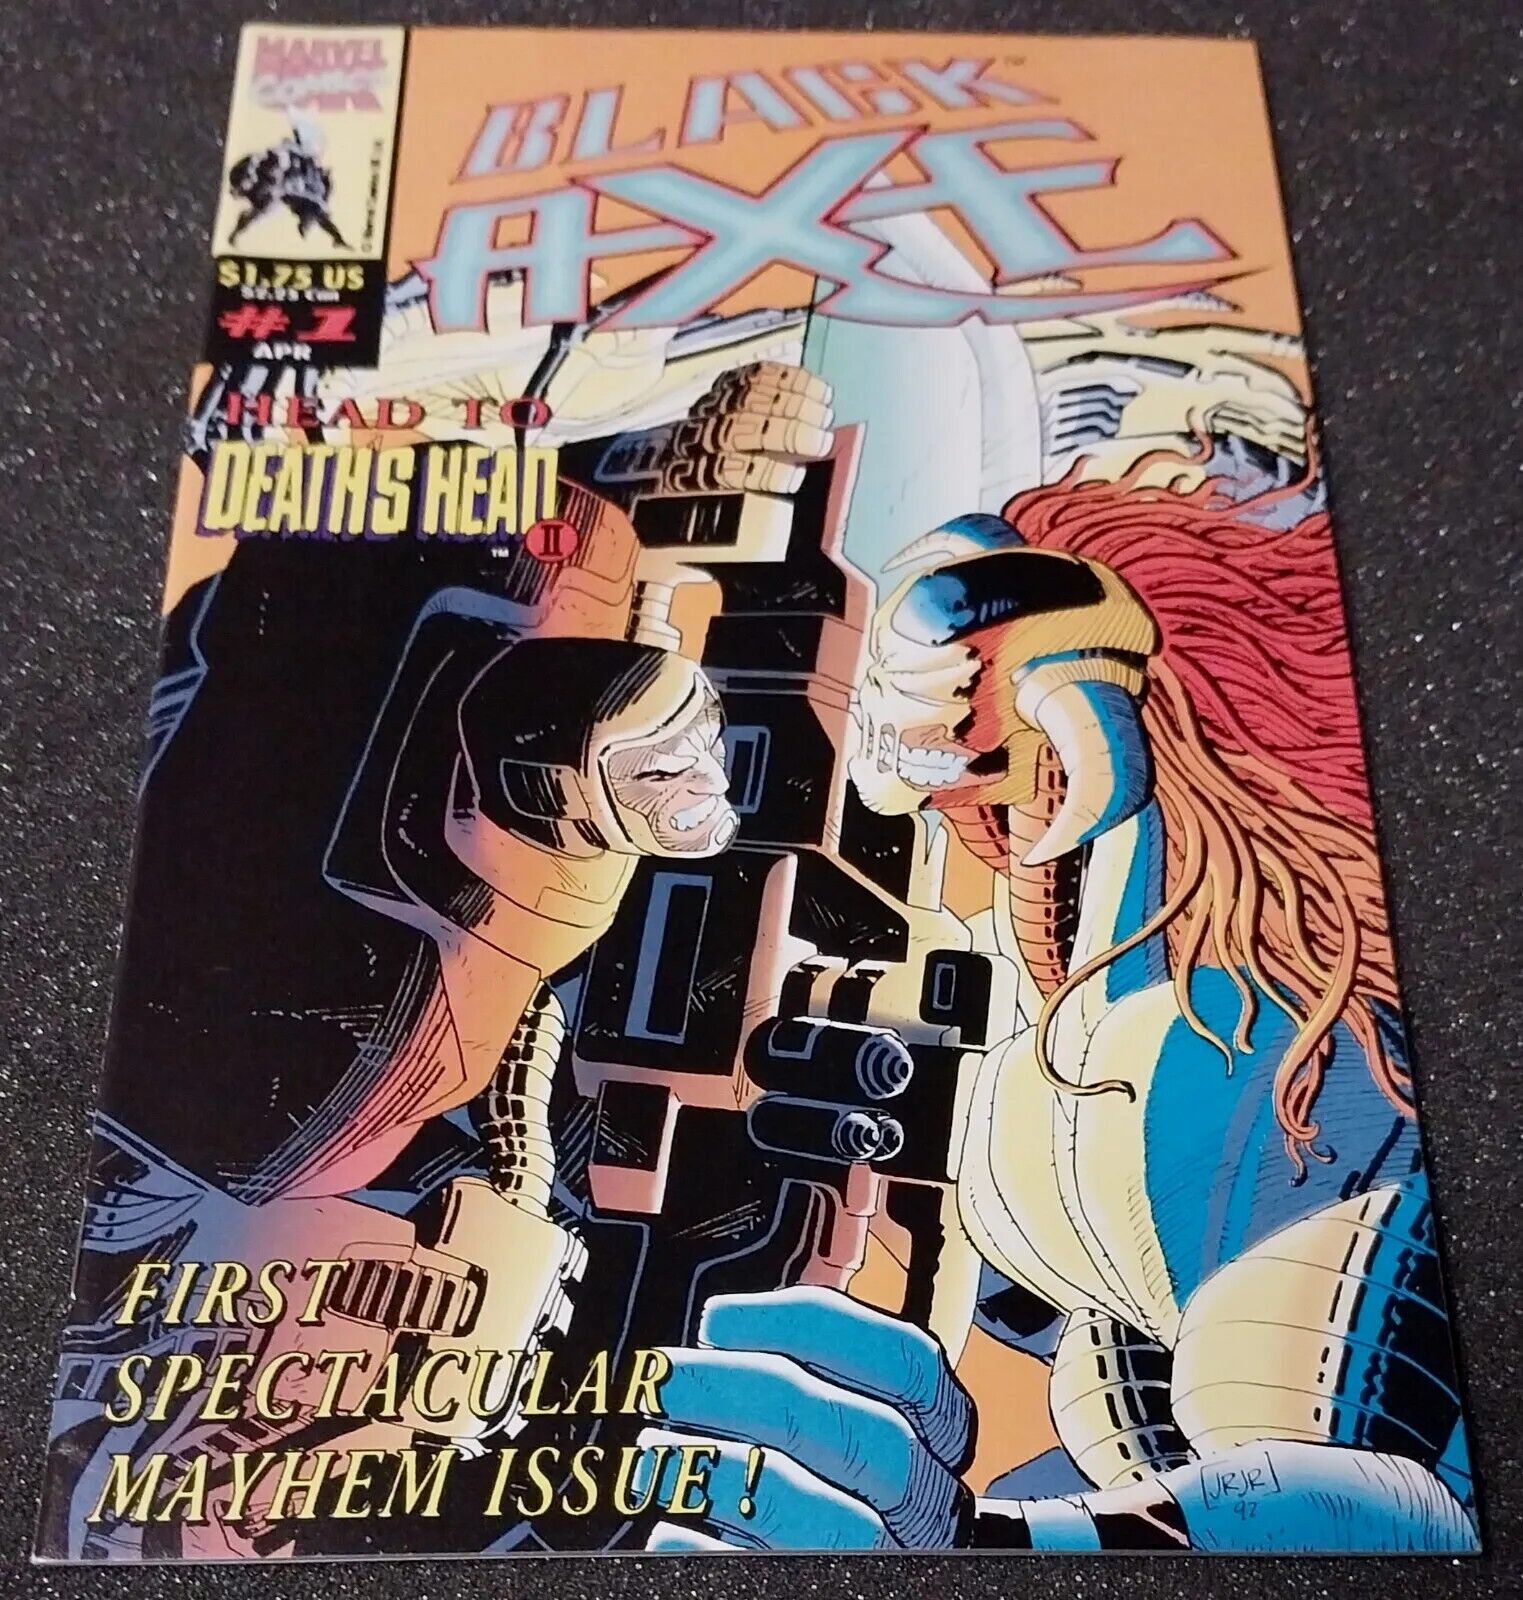 Marvel Comics Black Axe #1 Apr 1993 Vintage Head To Deaths Head First Issue